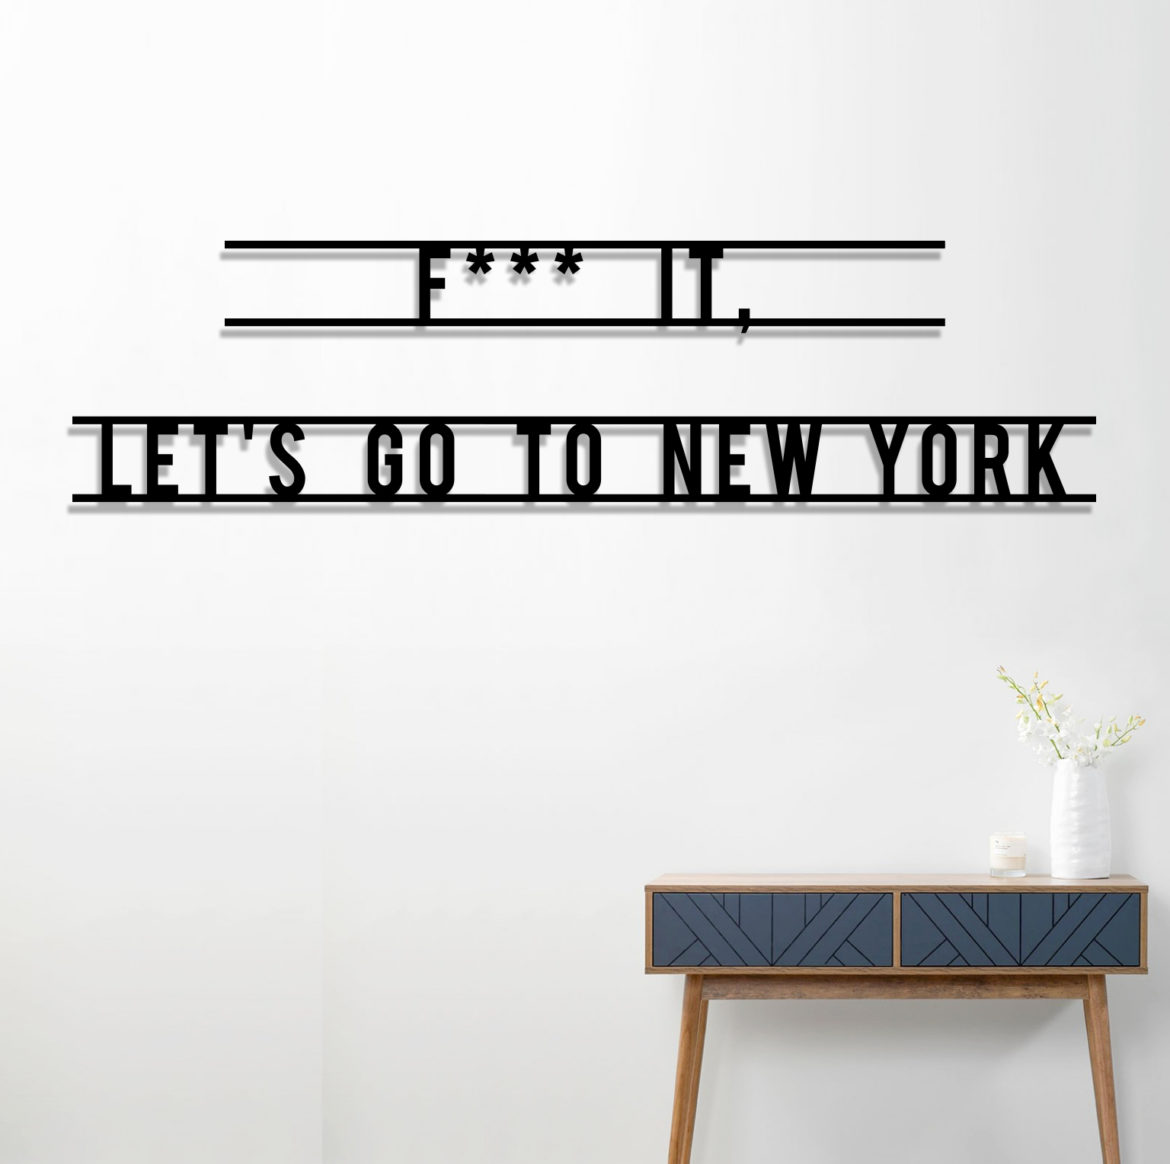 f*** it let's go to new york quote design wall art